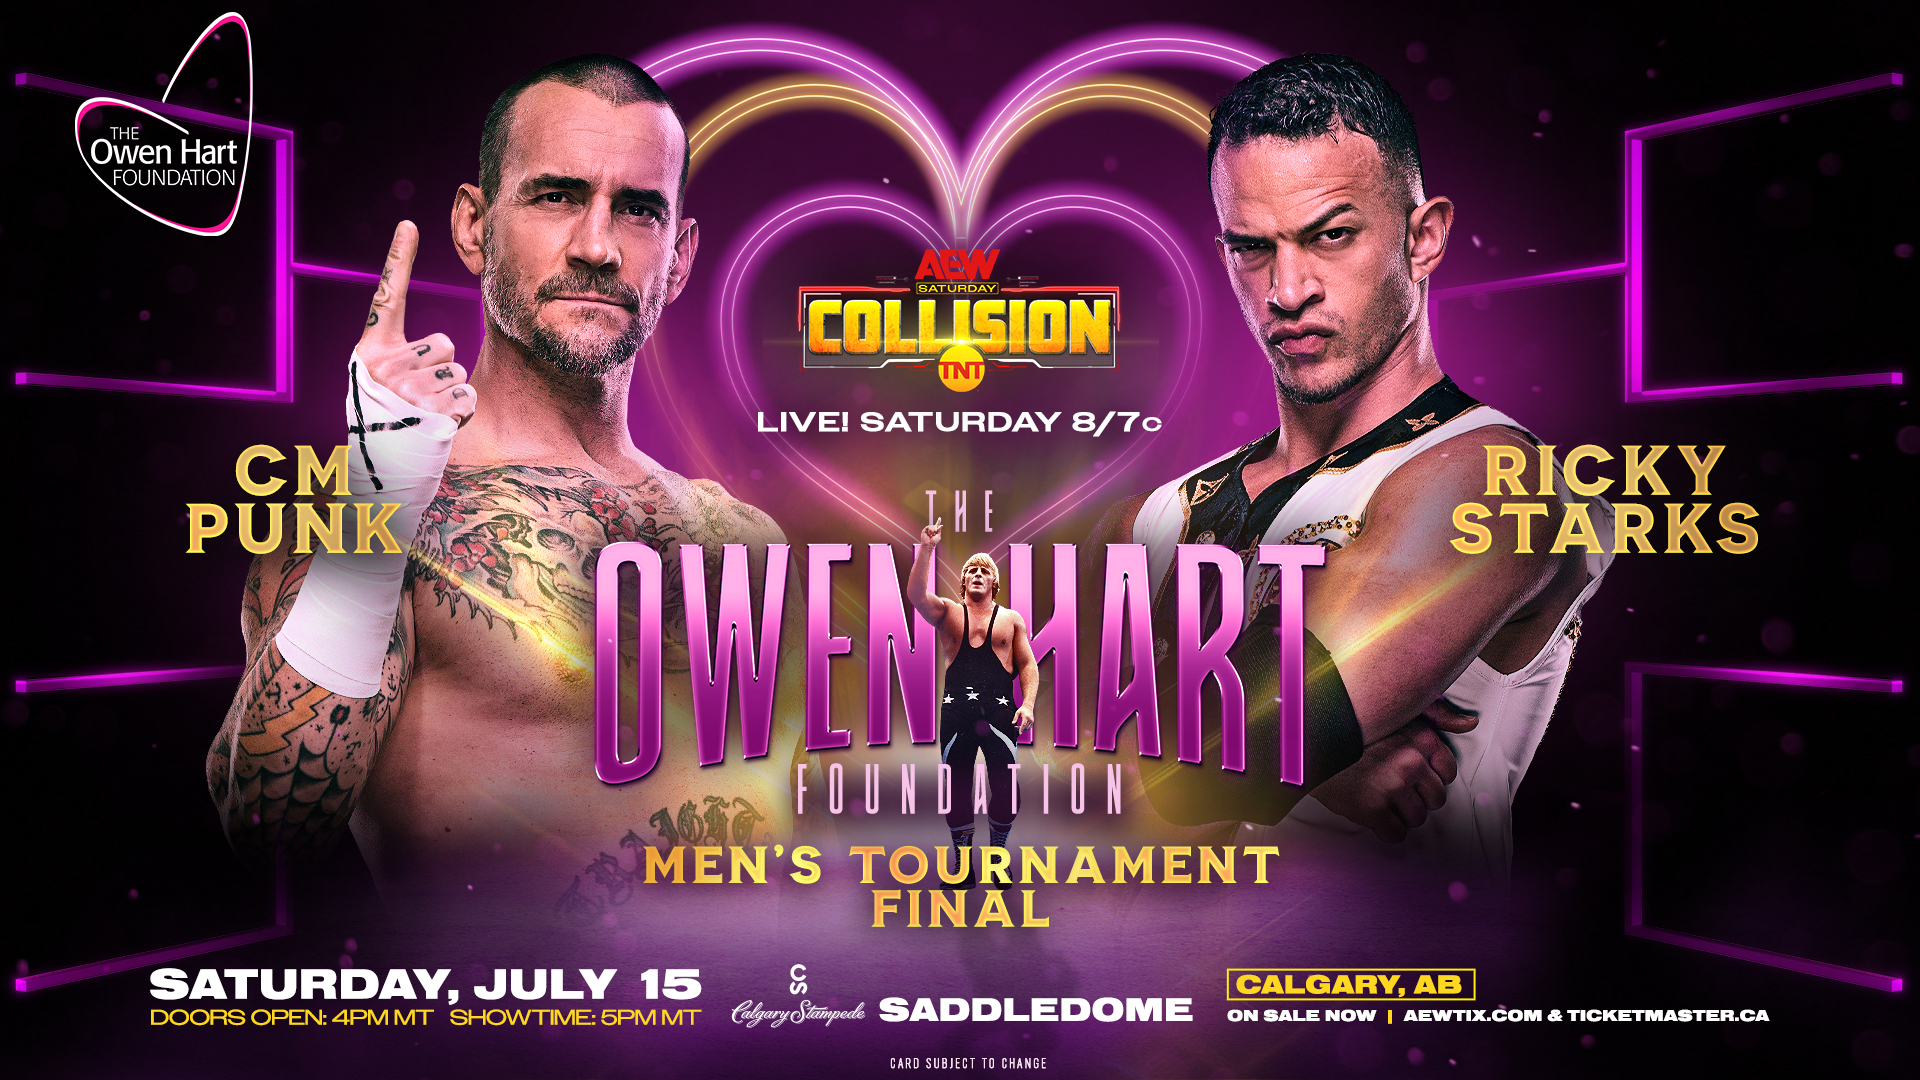 AEW Collision match graphic featuring CM Punk vs. Ricky Starks.